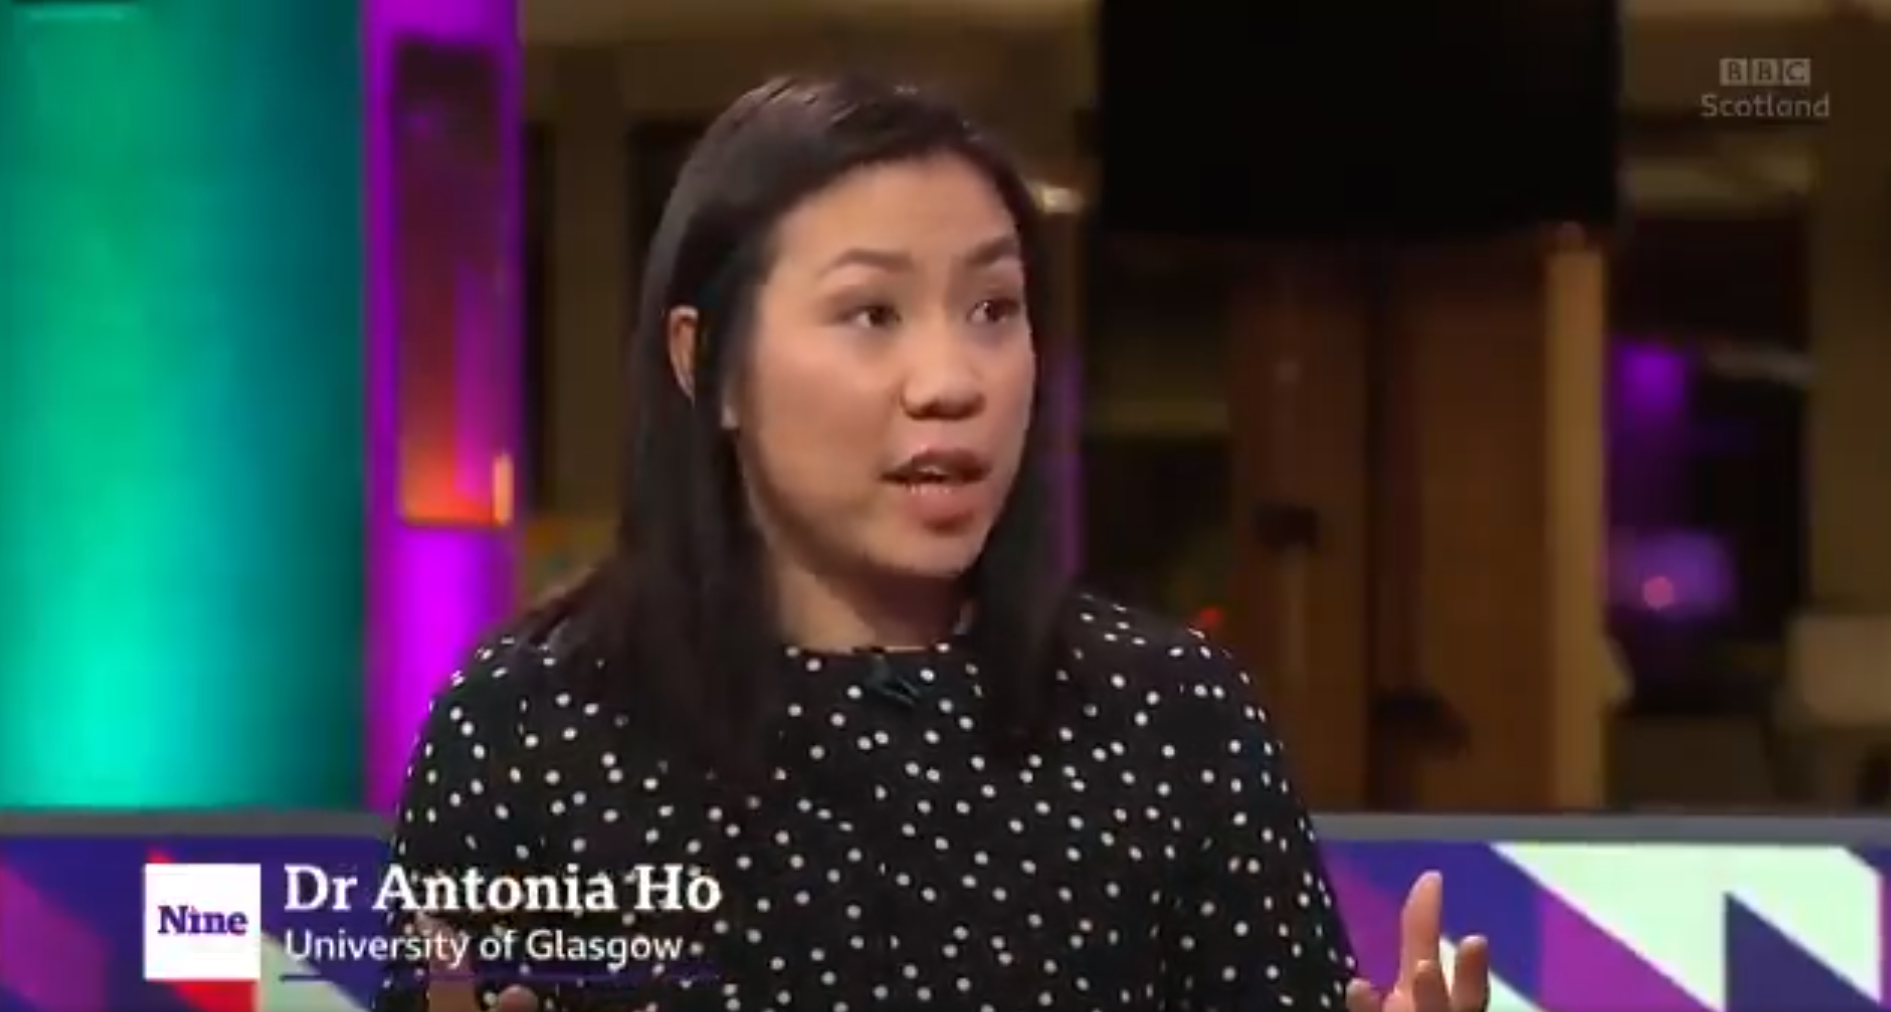 Dr Antonia Ho sat in the BBC the Nine studio talking on air